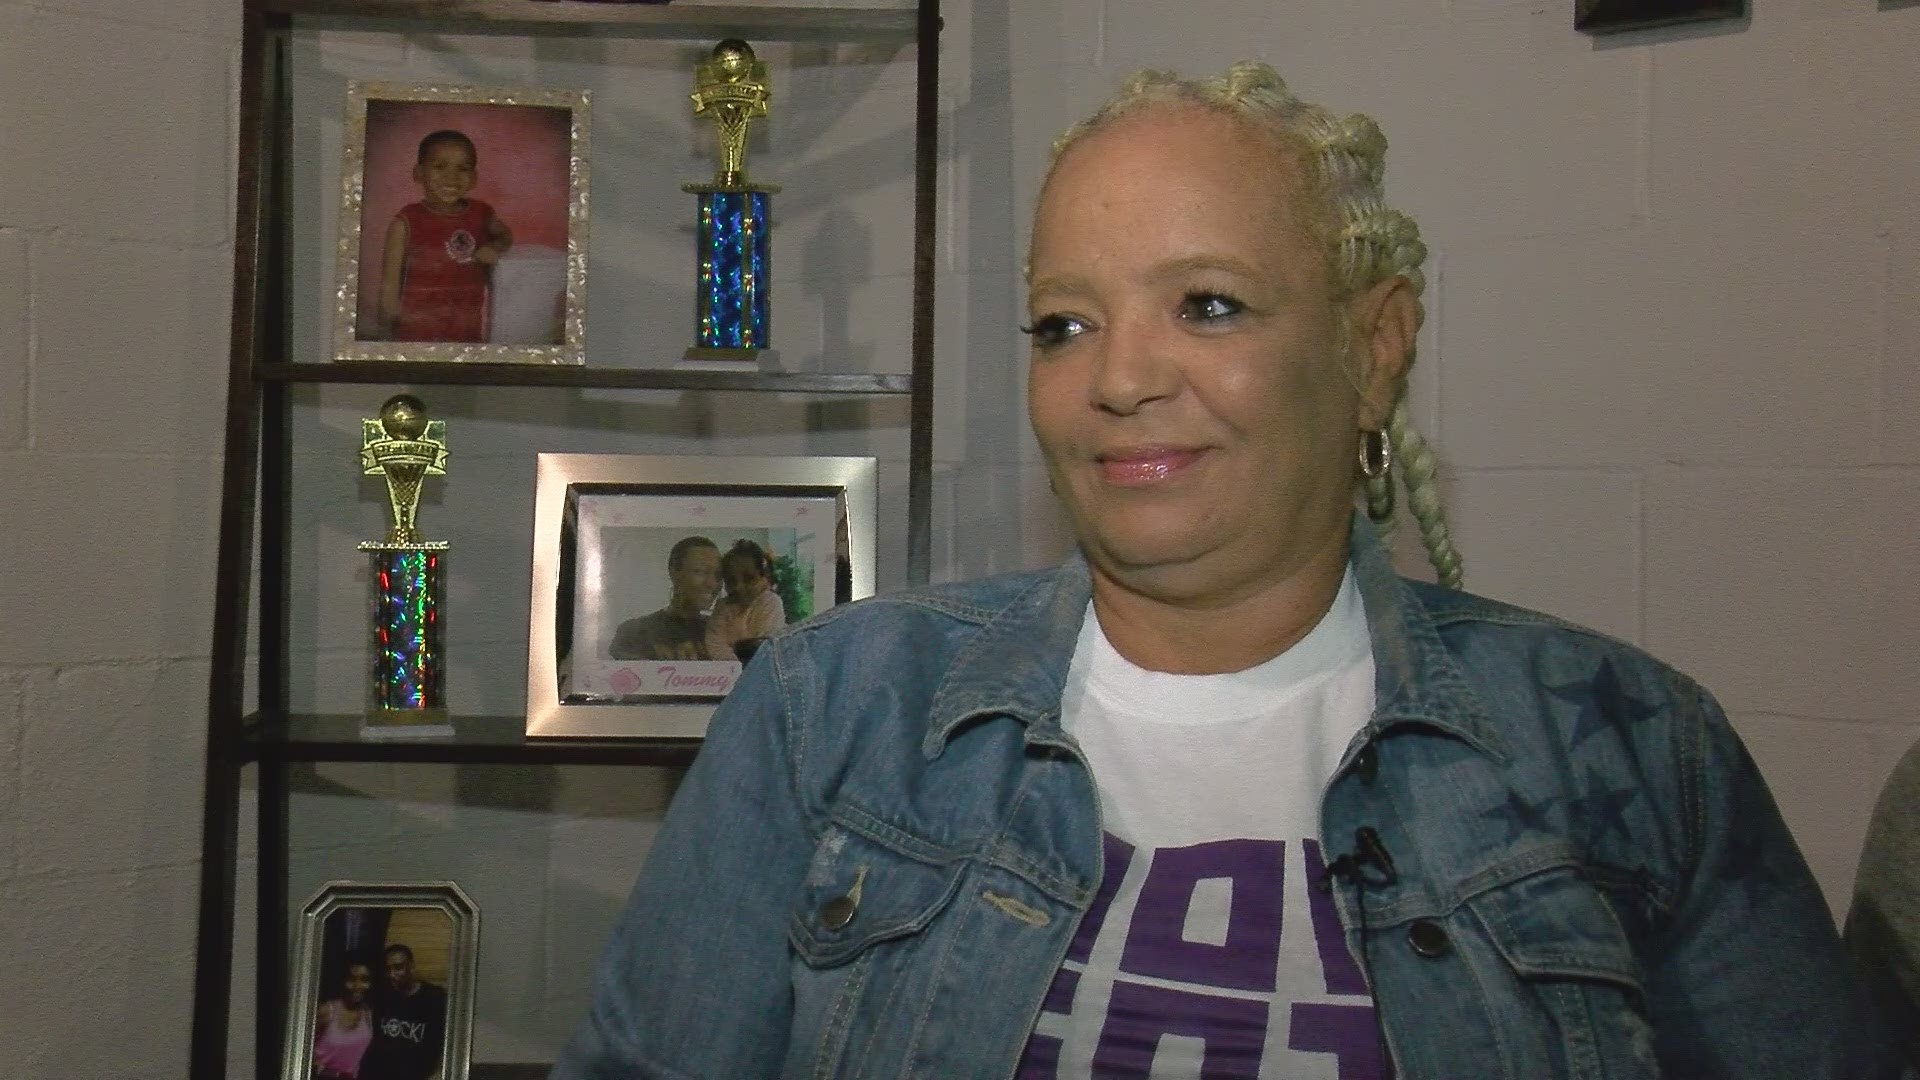 Tina Butts talked about the moment she found out that her only grandson was gone, a grandson she says was a good kid and always surrounded by love.